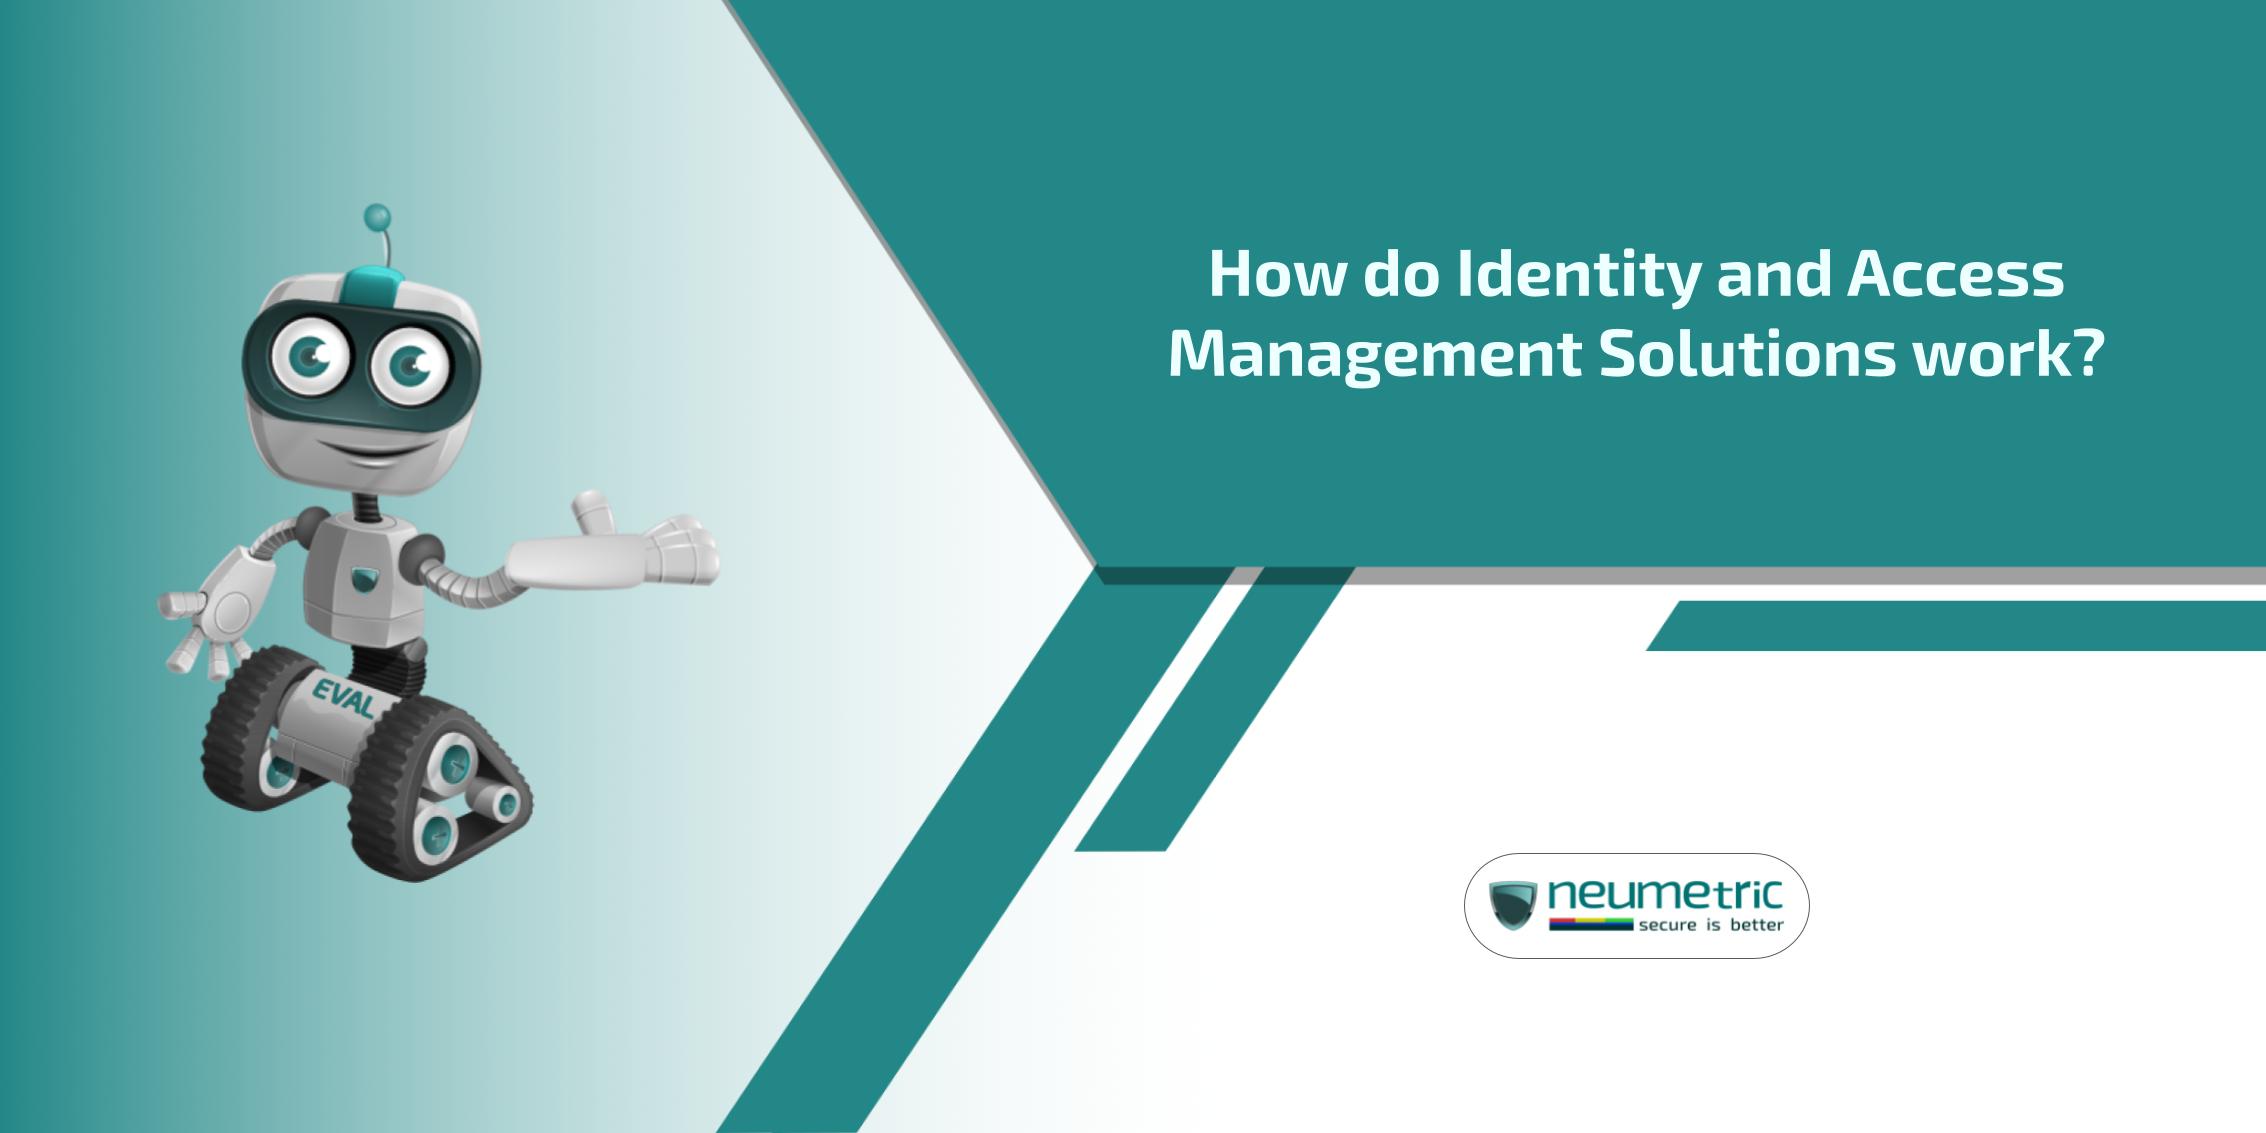 Identity and access management solutions